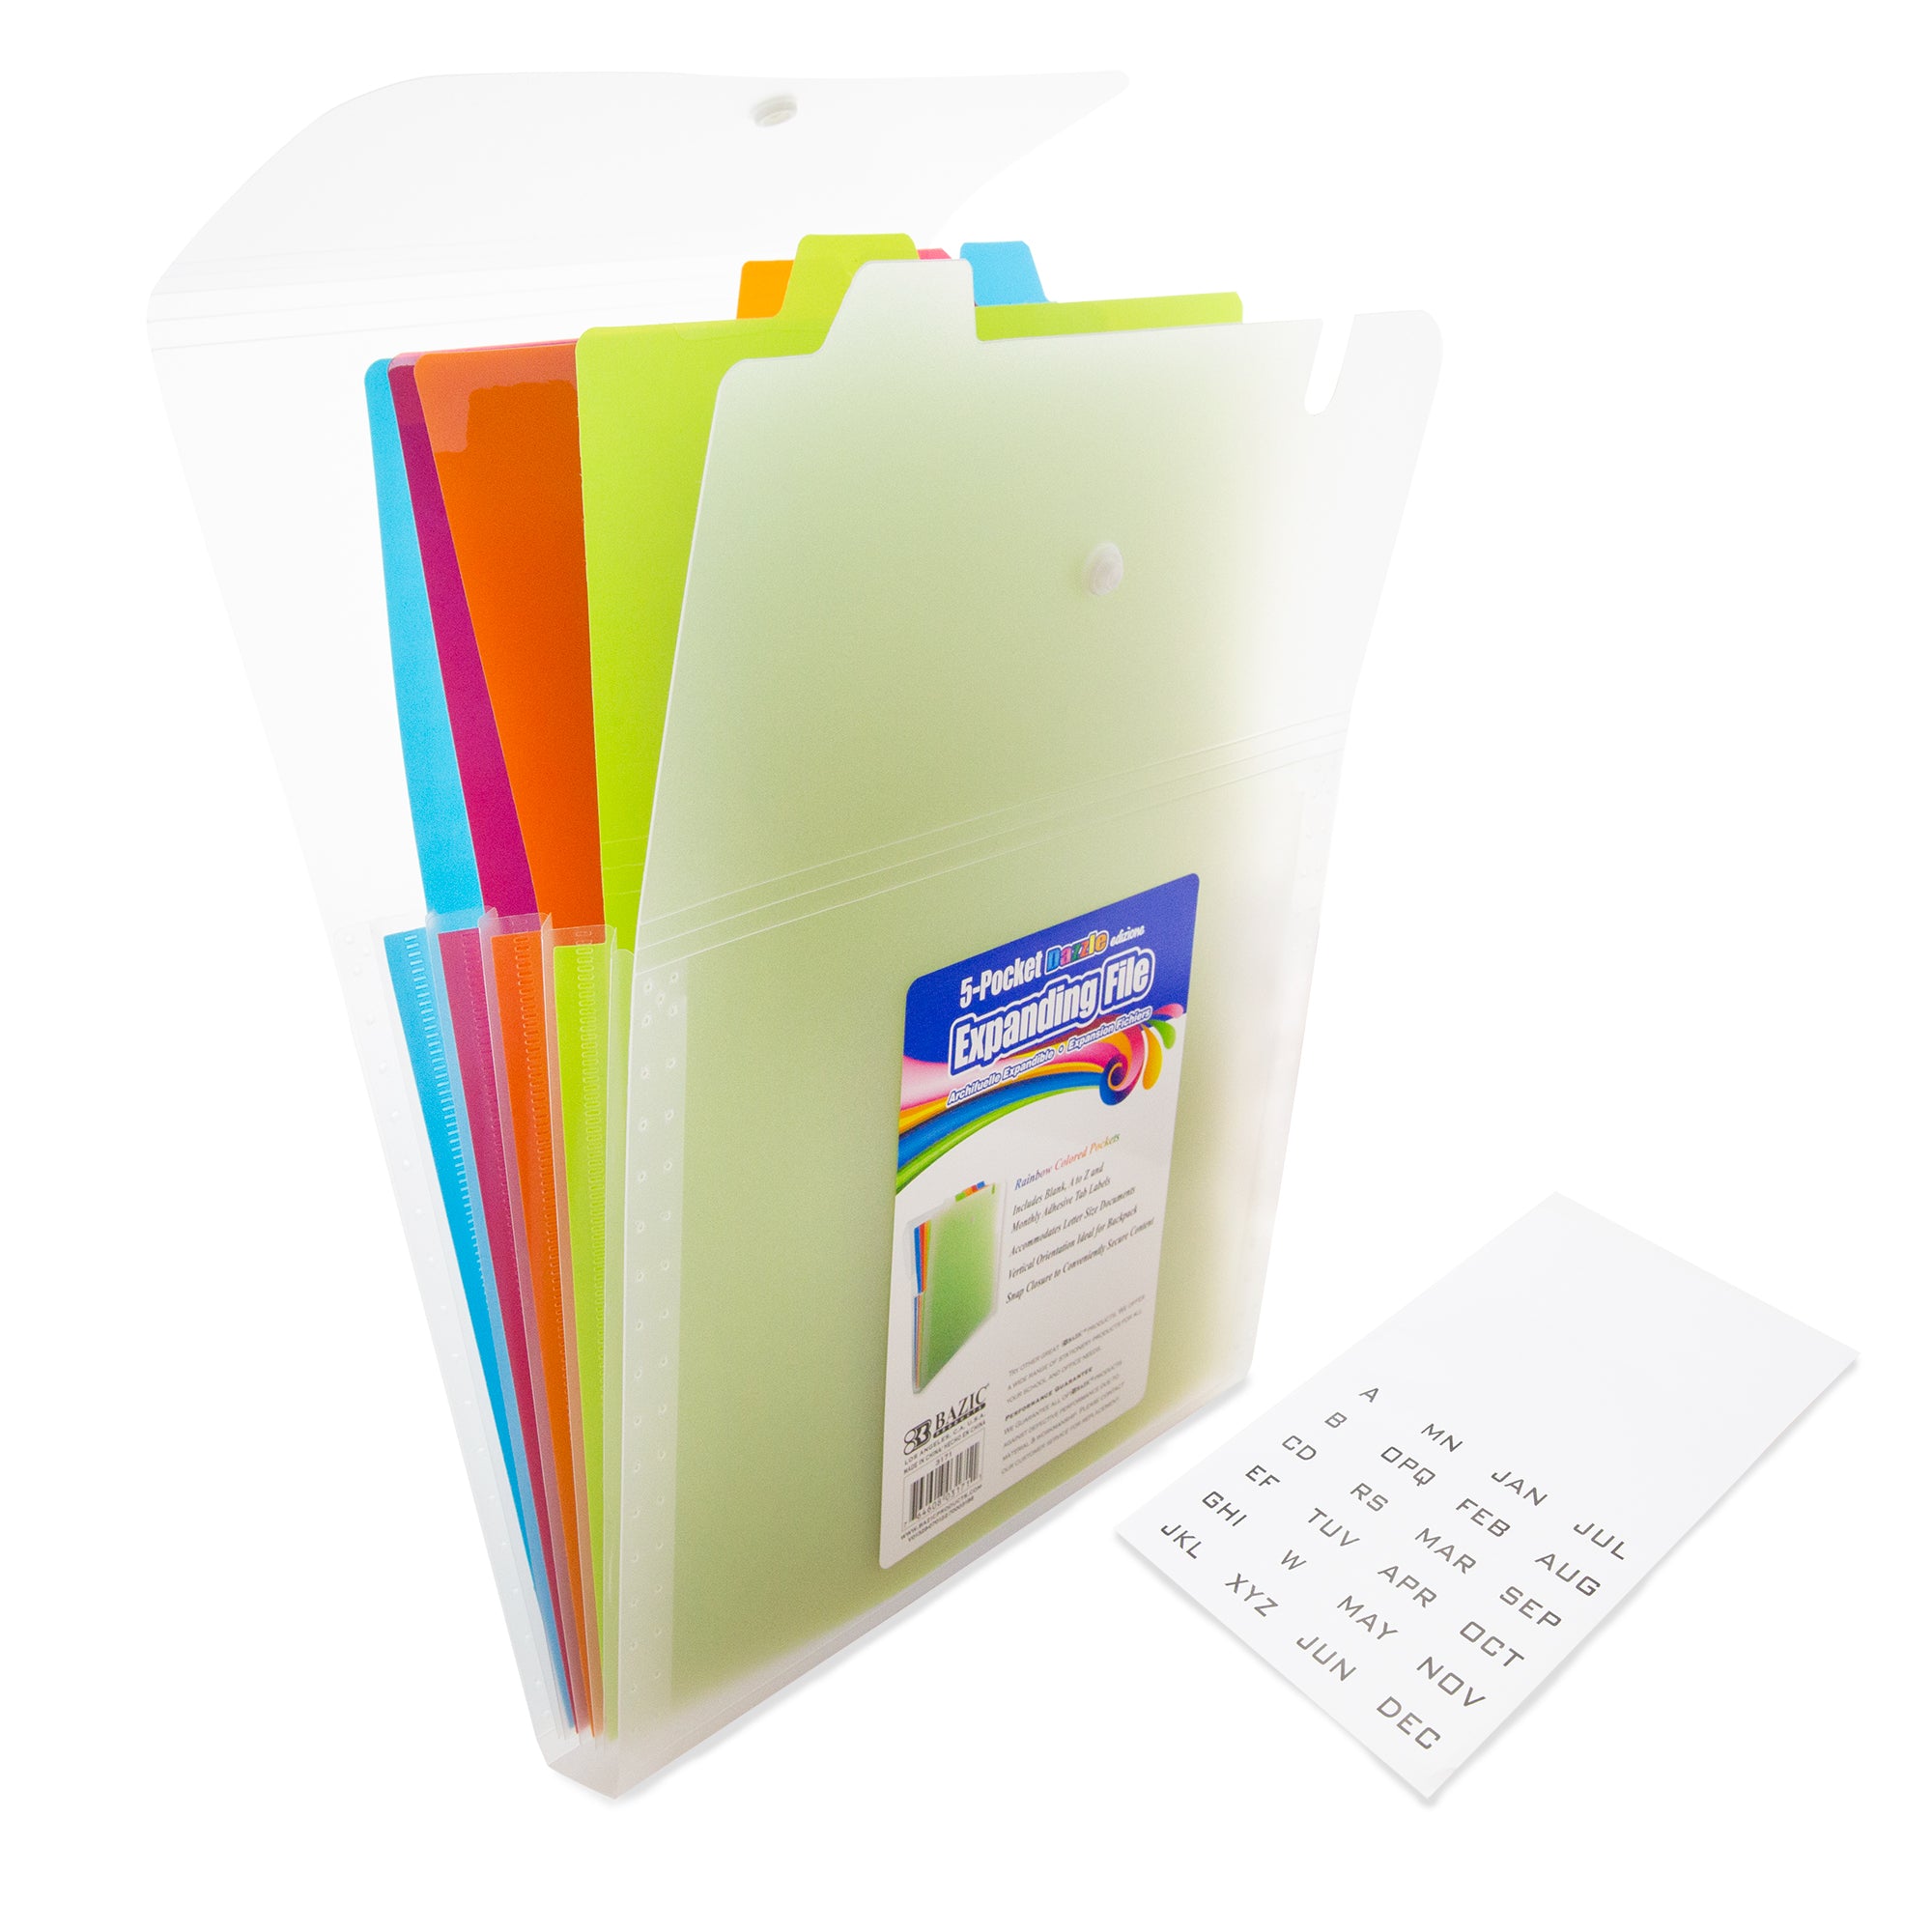 Adhesive document holder pouch